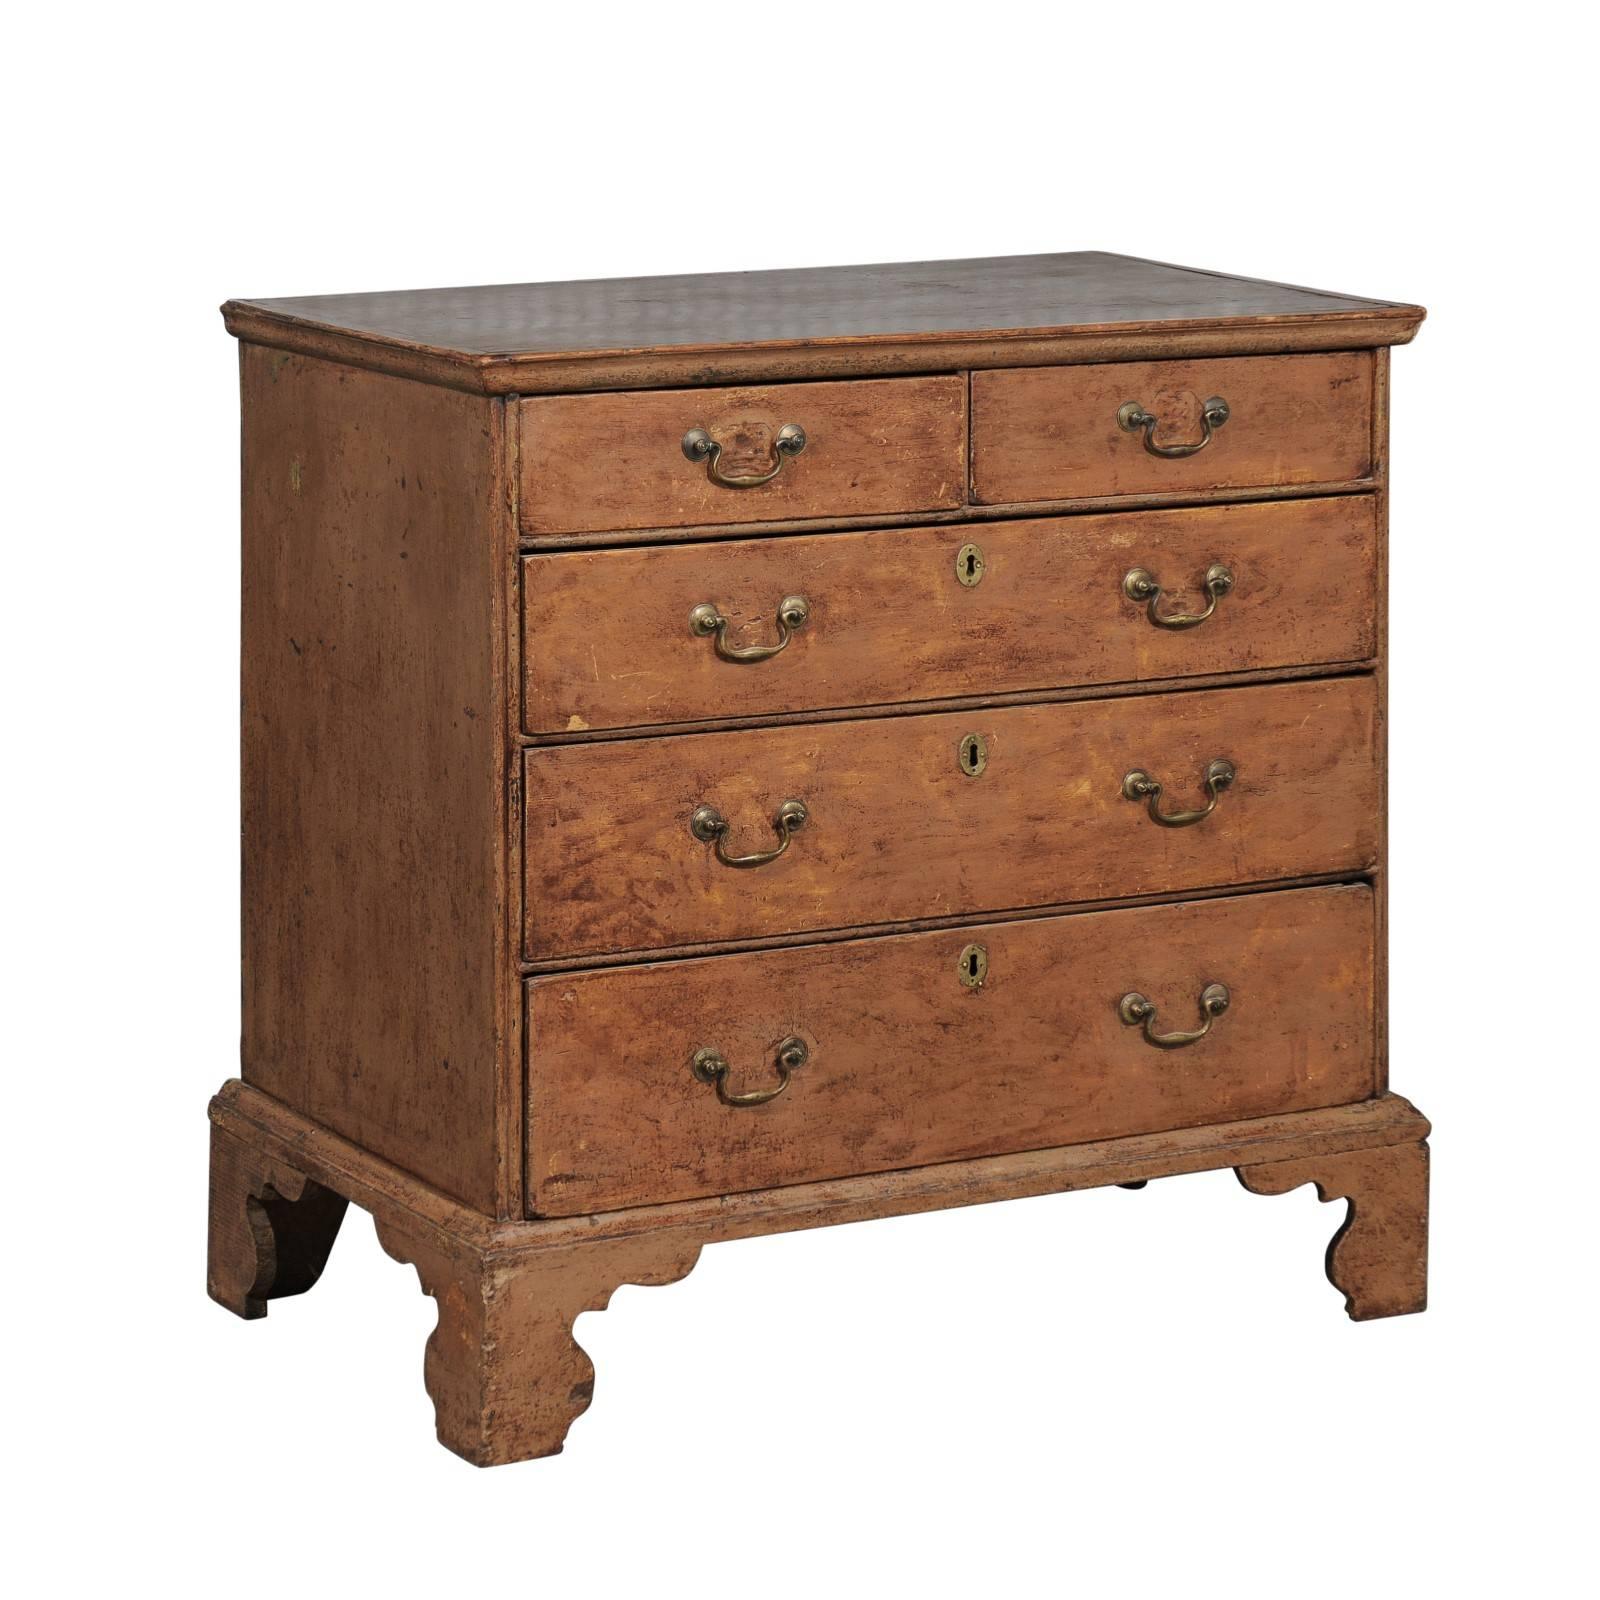 English 1800s George III Period Four-Drawer Painted Chest with Bracket Feet